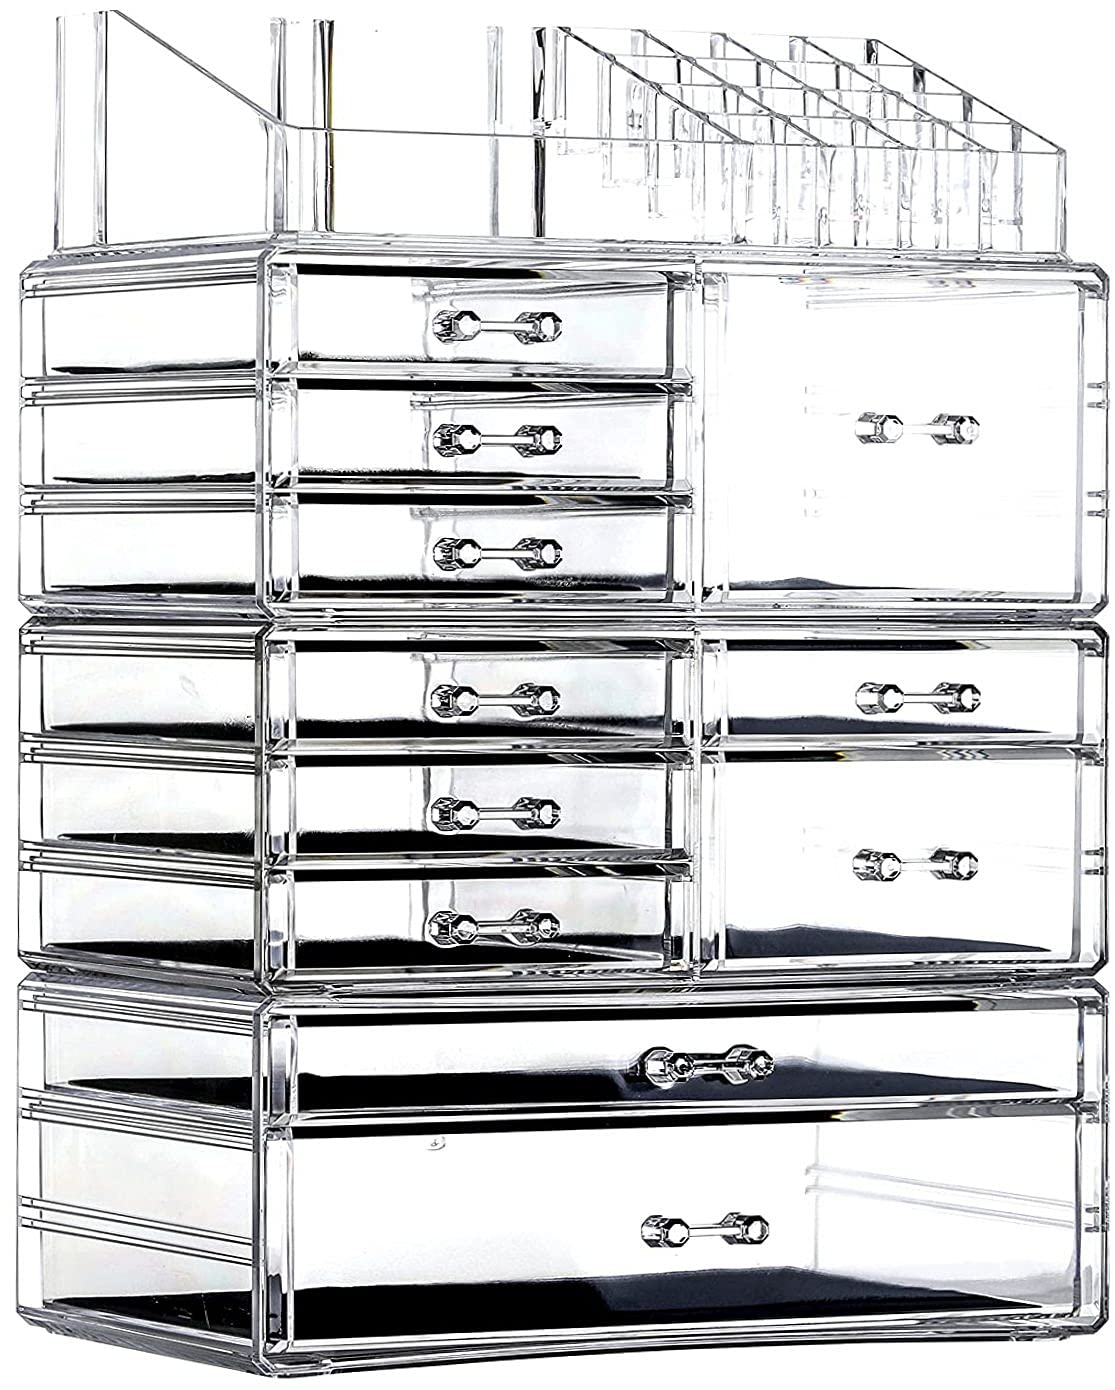 Cq acrylic Clear Makeup Storage Organizer Skin Care X Cosmetic Cases Stackable Storage